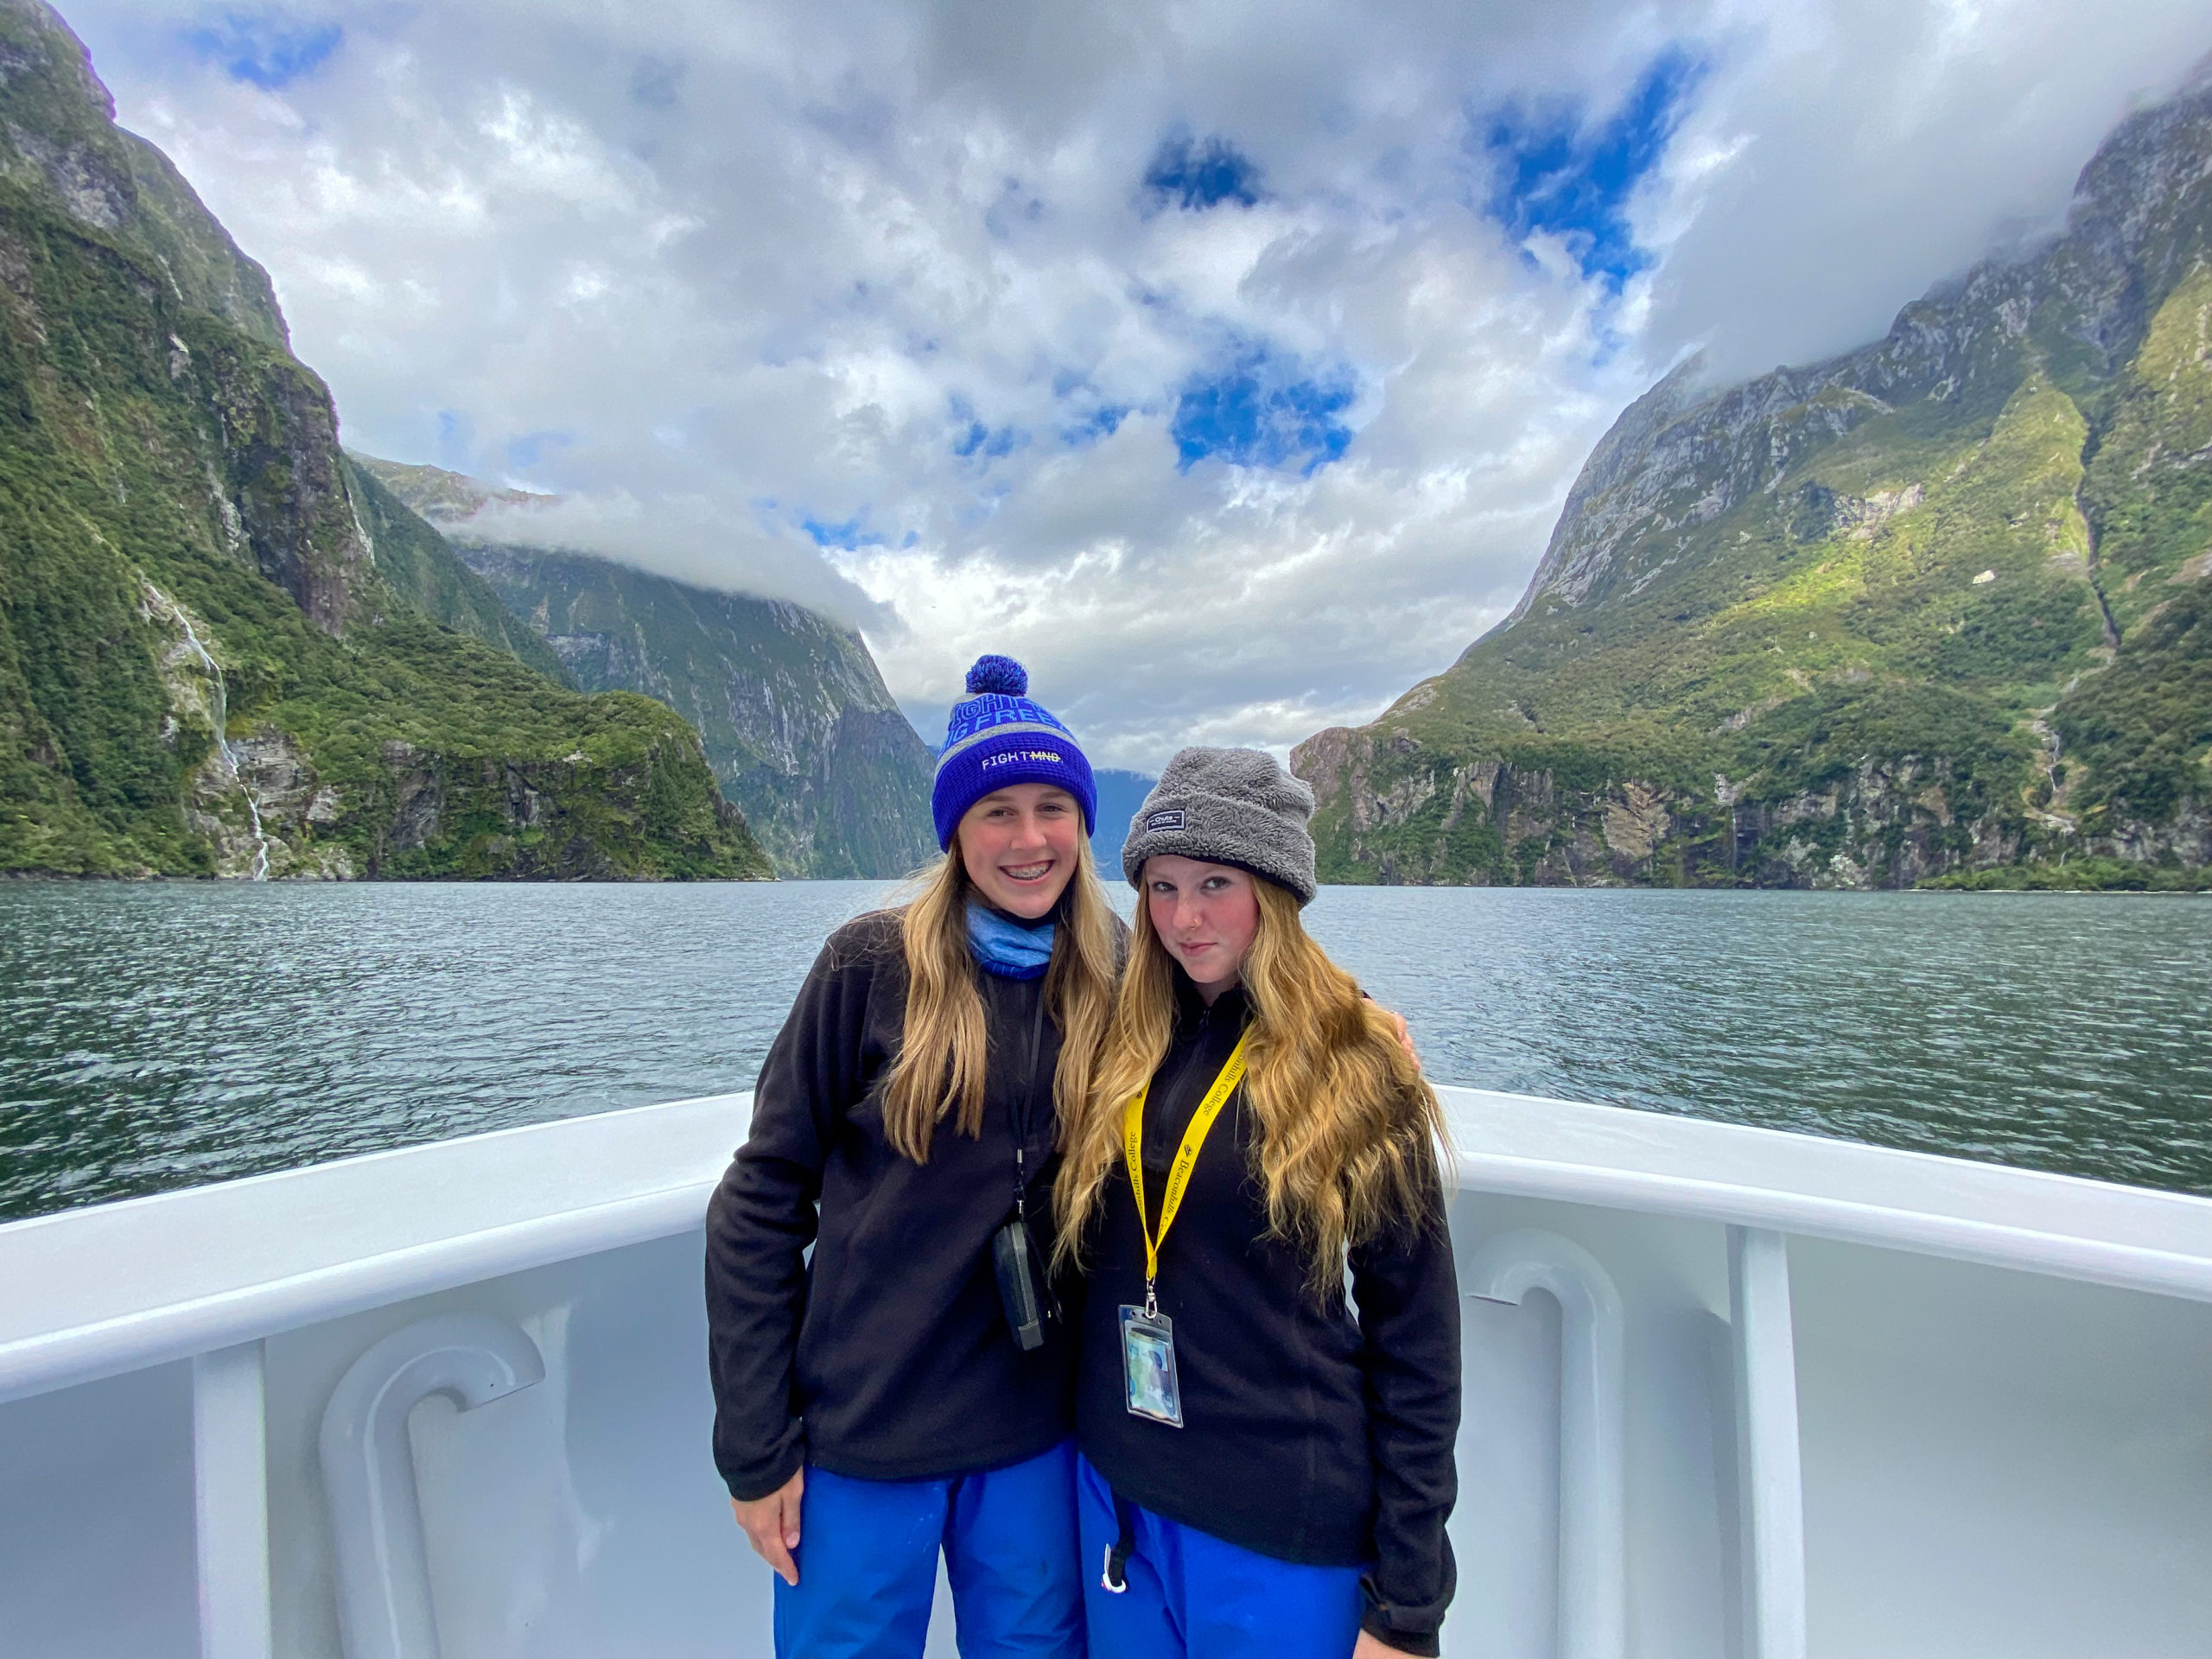 Two Beaconhills College students cruising through Milford Sound.